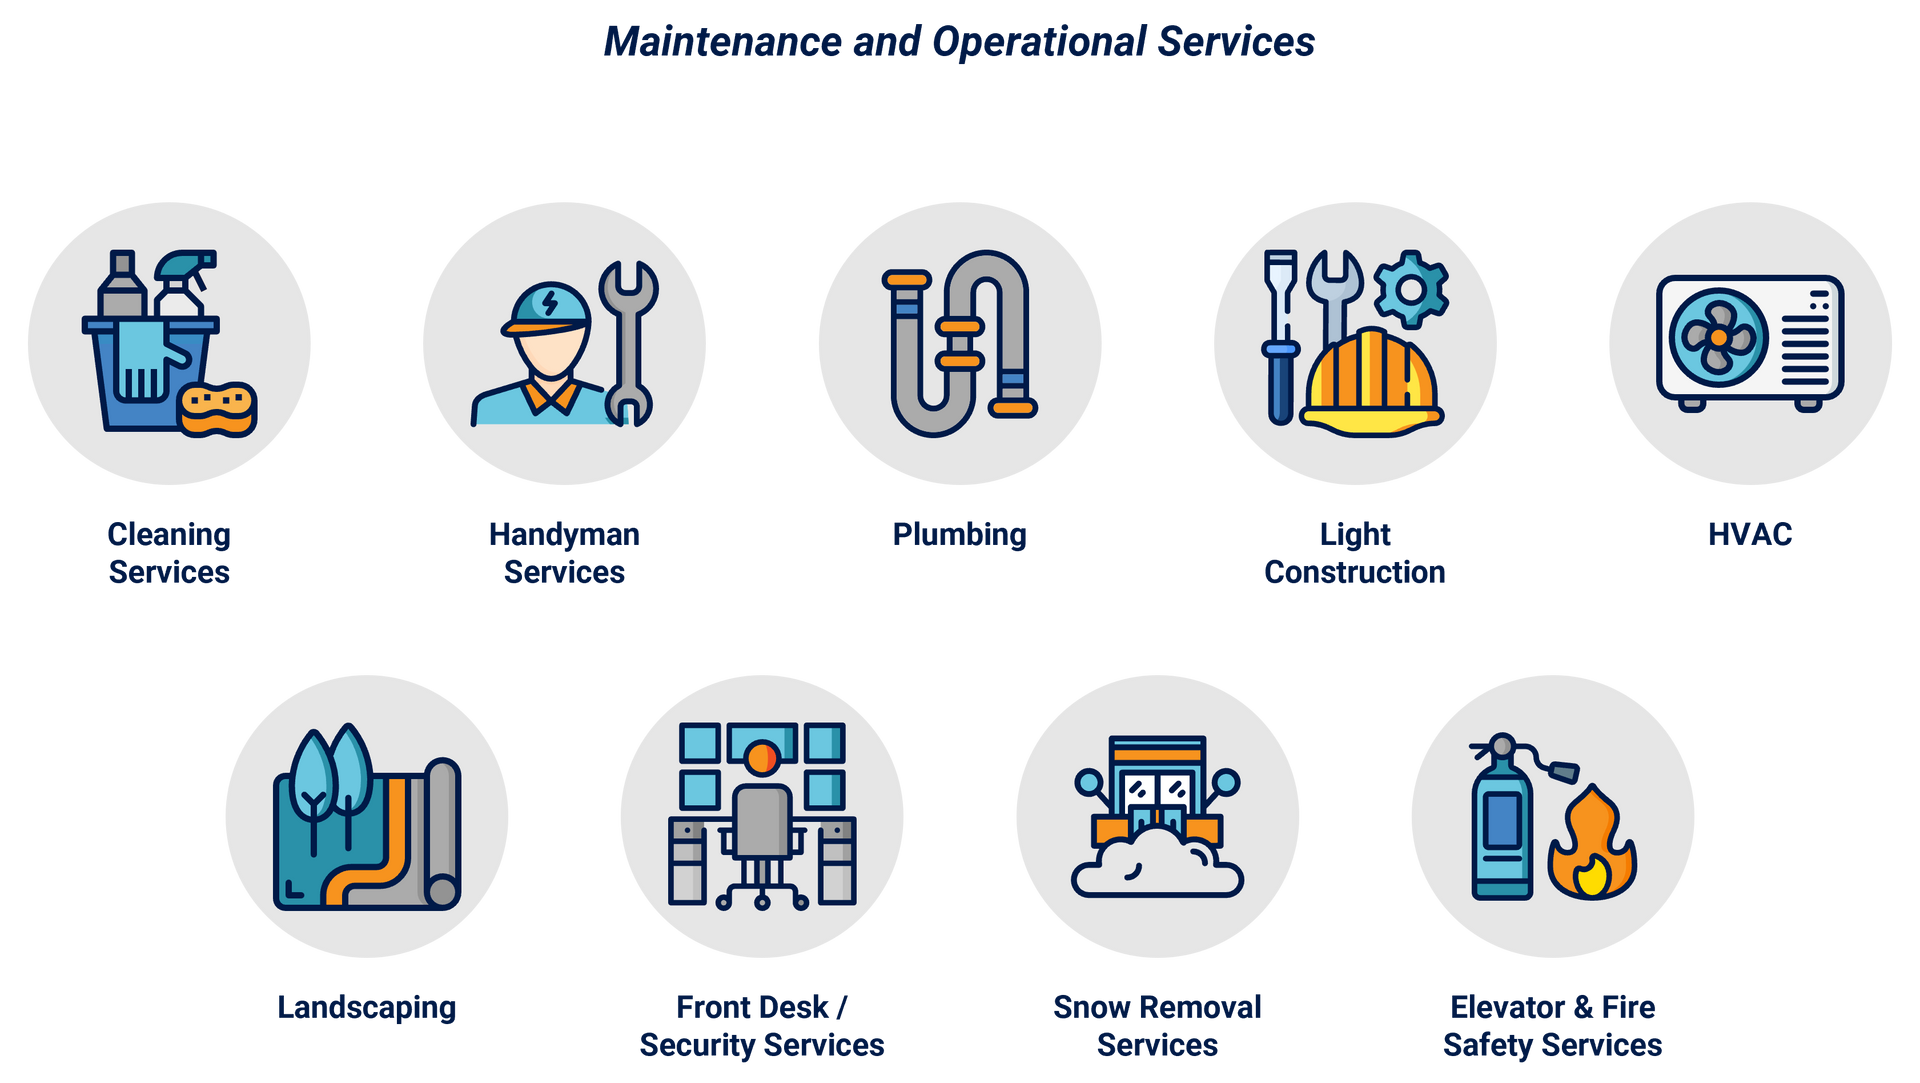 Graphic depicting what constitutes as maintenance/ongoing services:
- cleaning services
- handyman services
- plumbing
- light construction
- HVAC
- landscaping
- front desk/security services
- snow removal services
- elevator and fire safety services